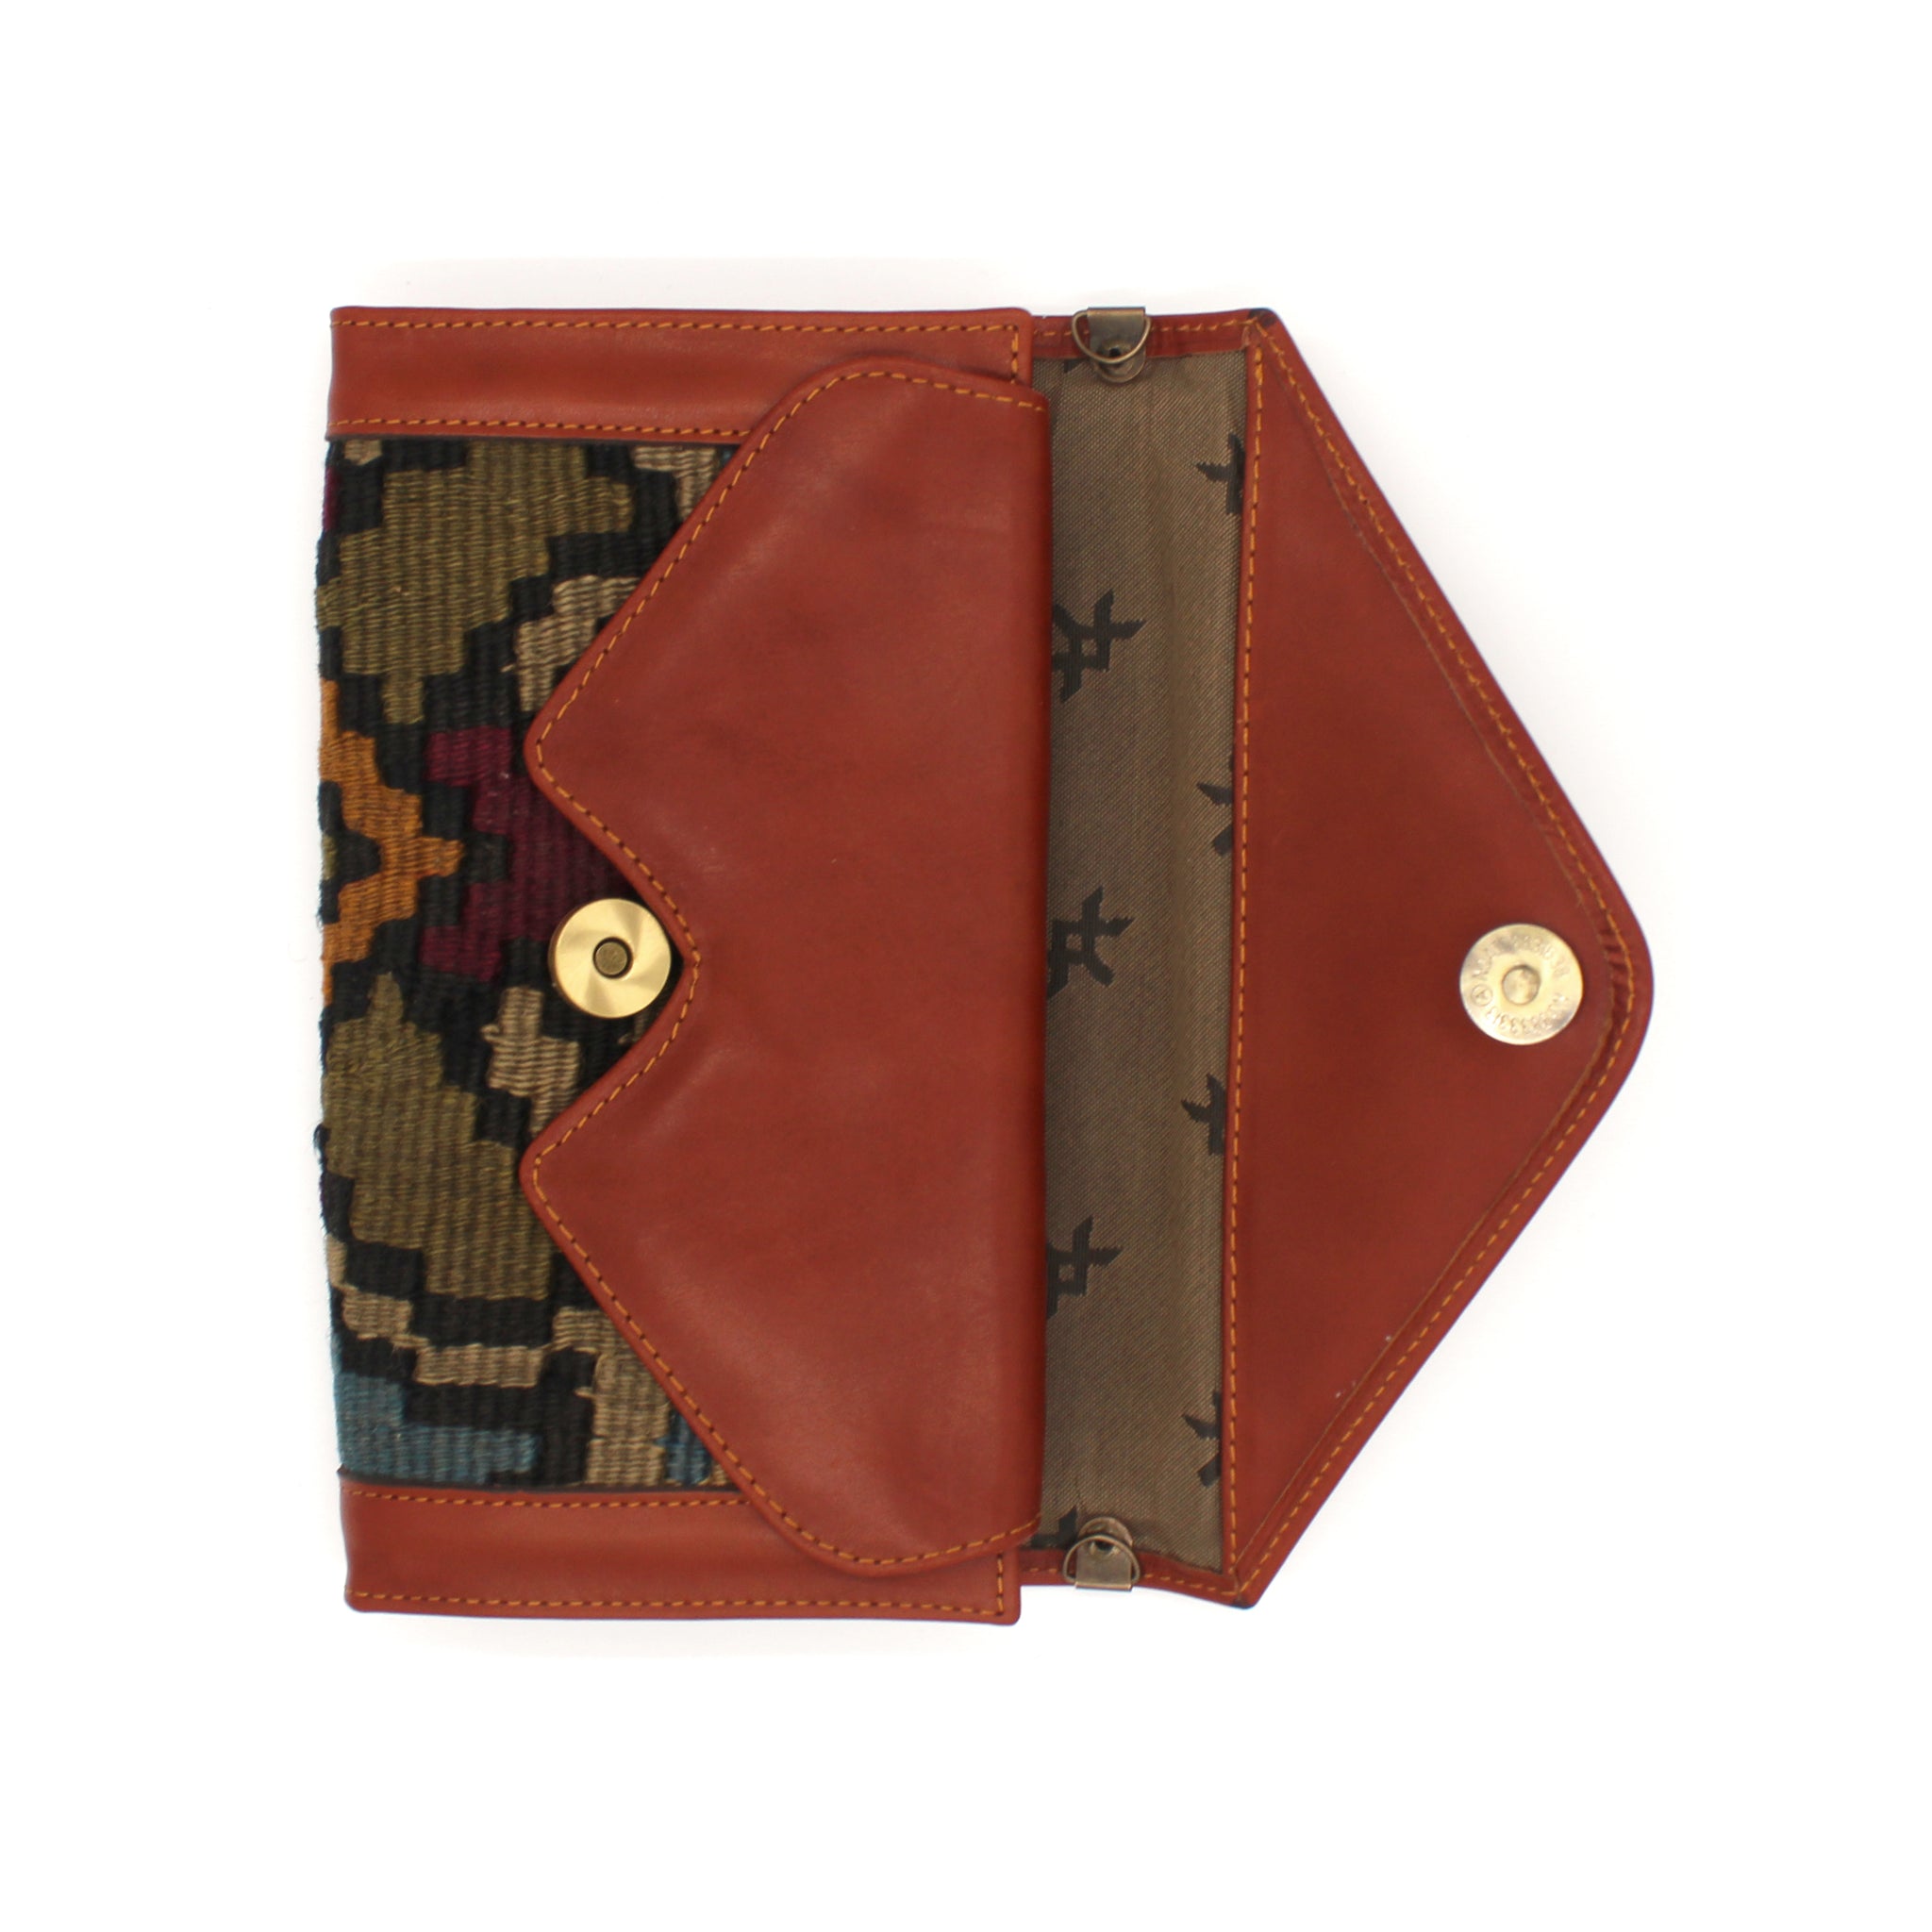 Vintage Rug and Leather Wallet with Strap No. 13